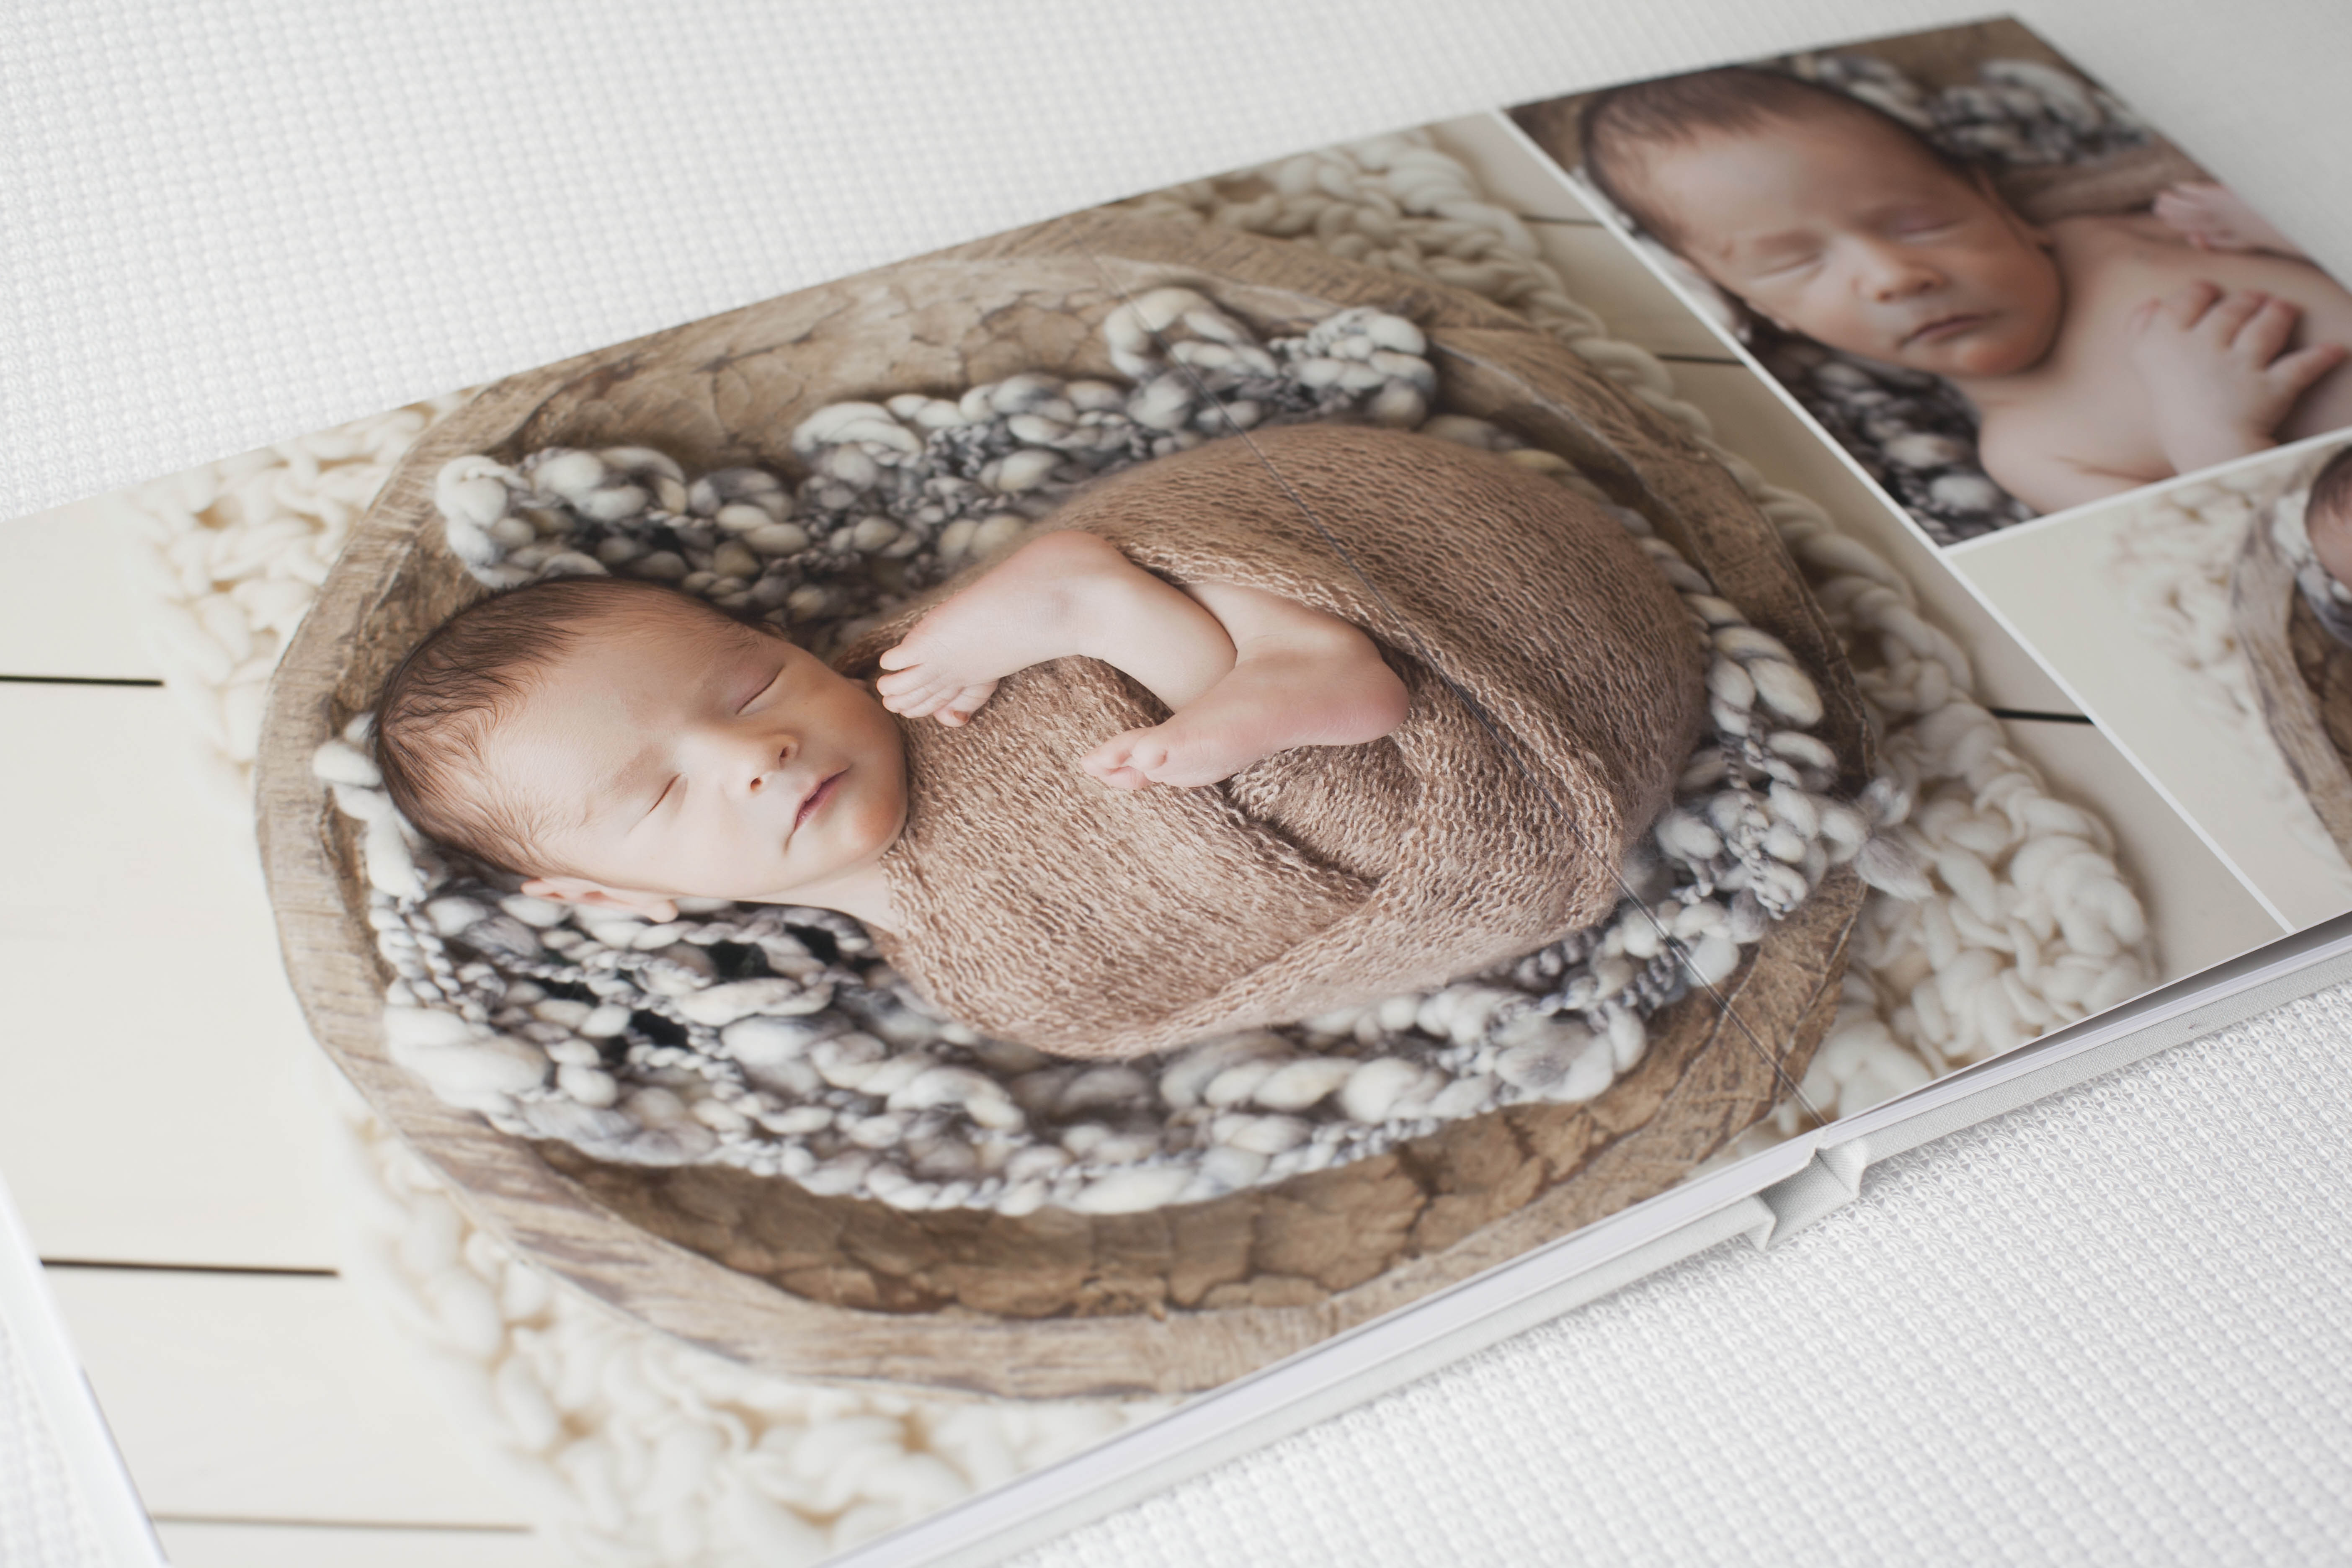 Professionally done photo albums create beautiful heirlooms.